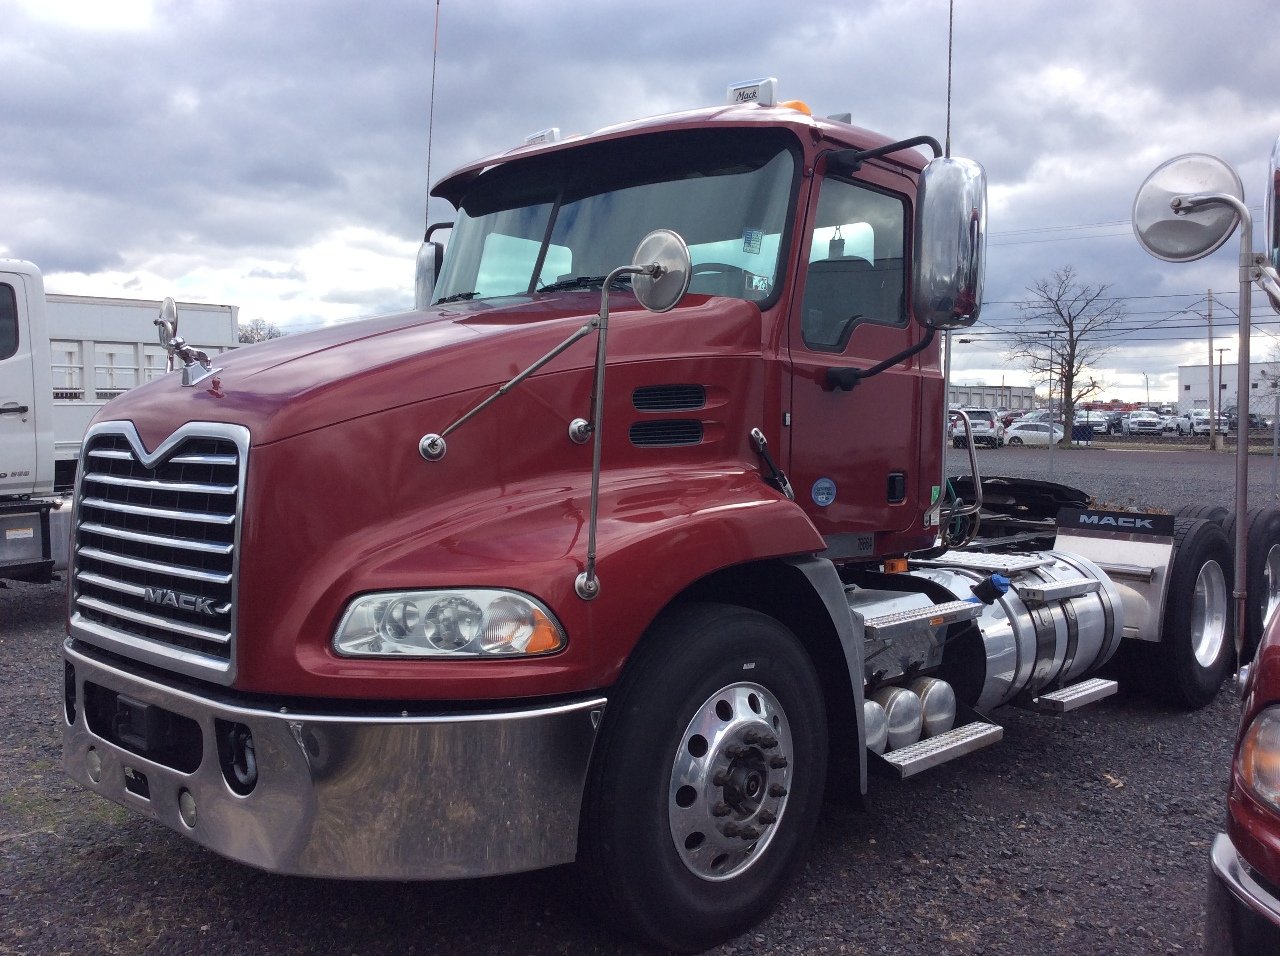 Used Truck Inventory - 1001883 01 2 - 133